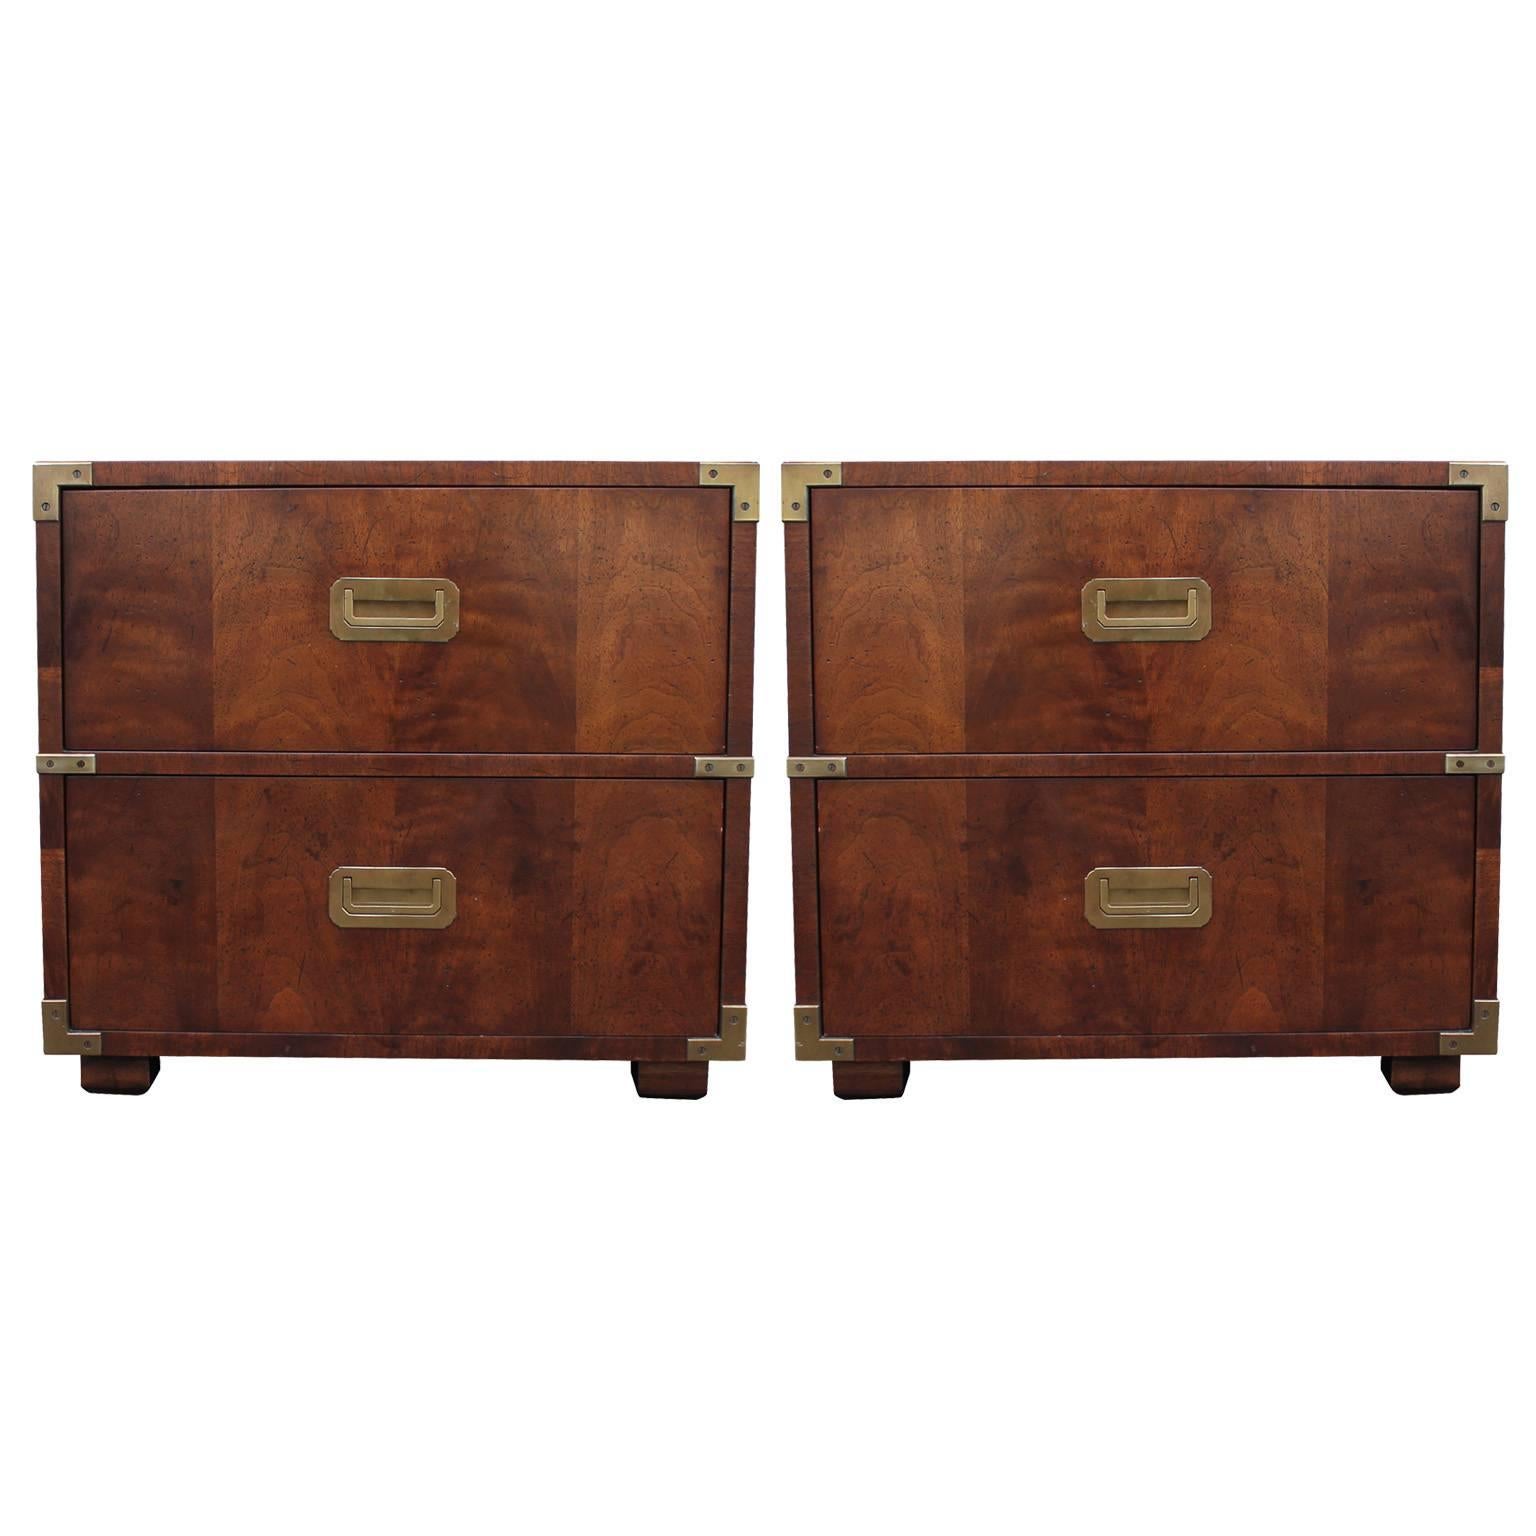 Lovely Pair of Campaign Style Nightstands or Side Tables by Henredon